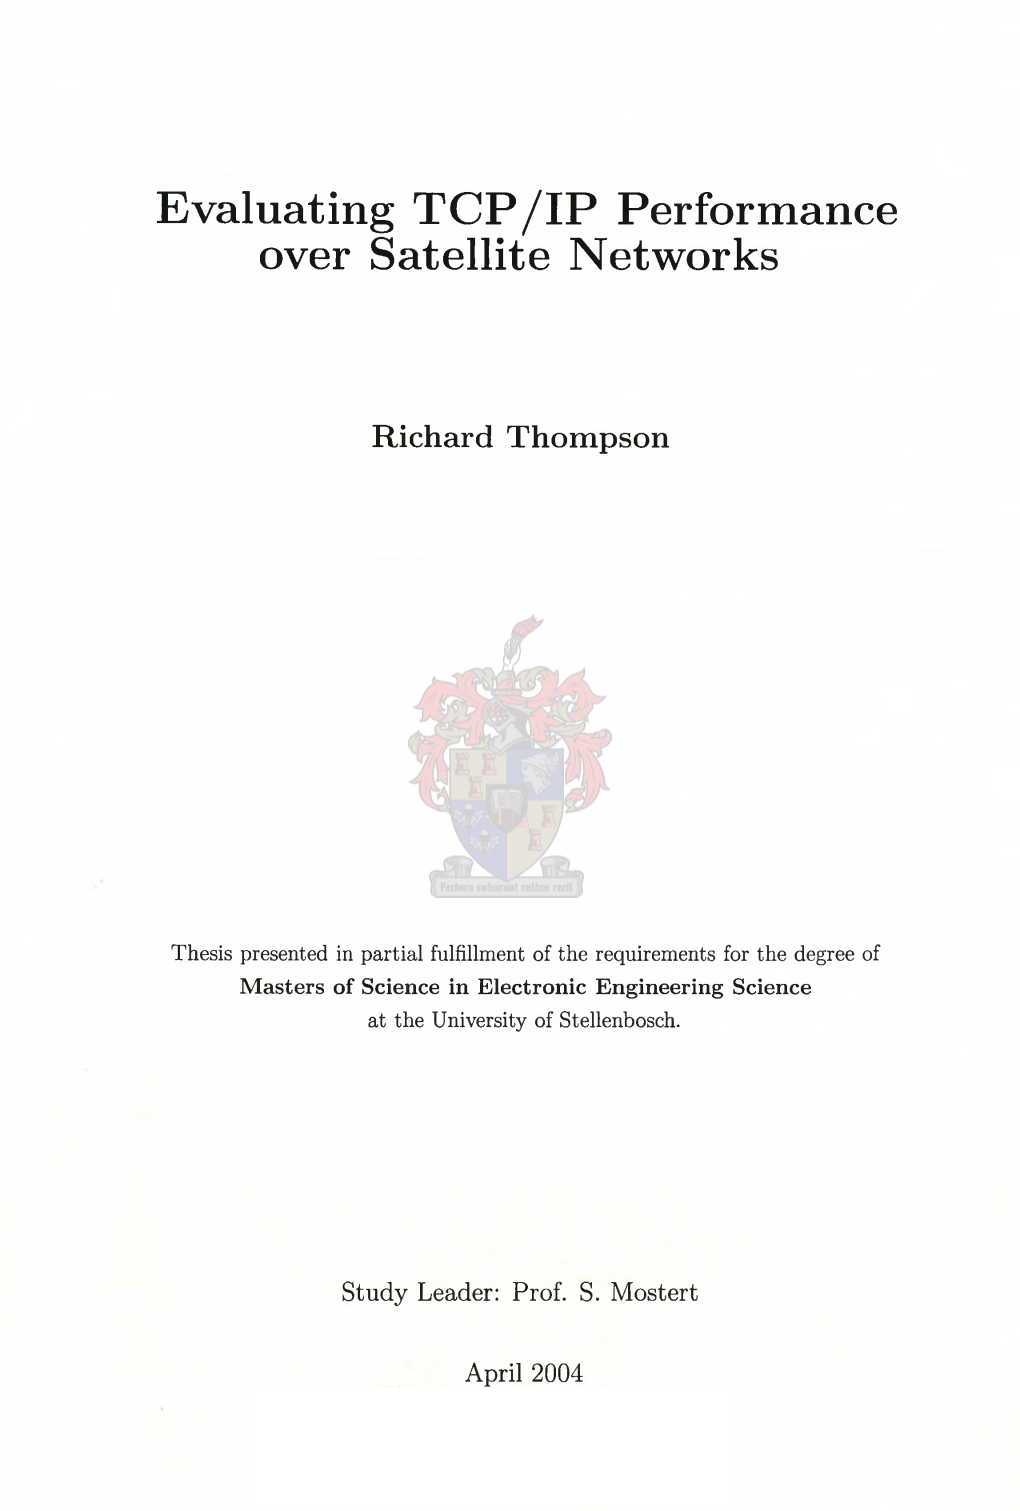 Evaluating TCP/IP Performance Over Satellite Networks